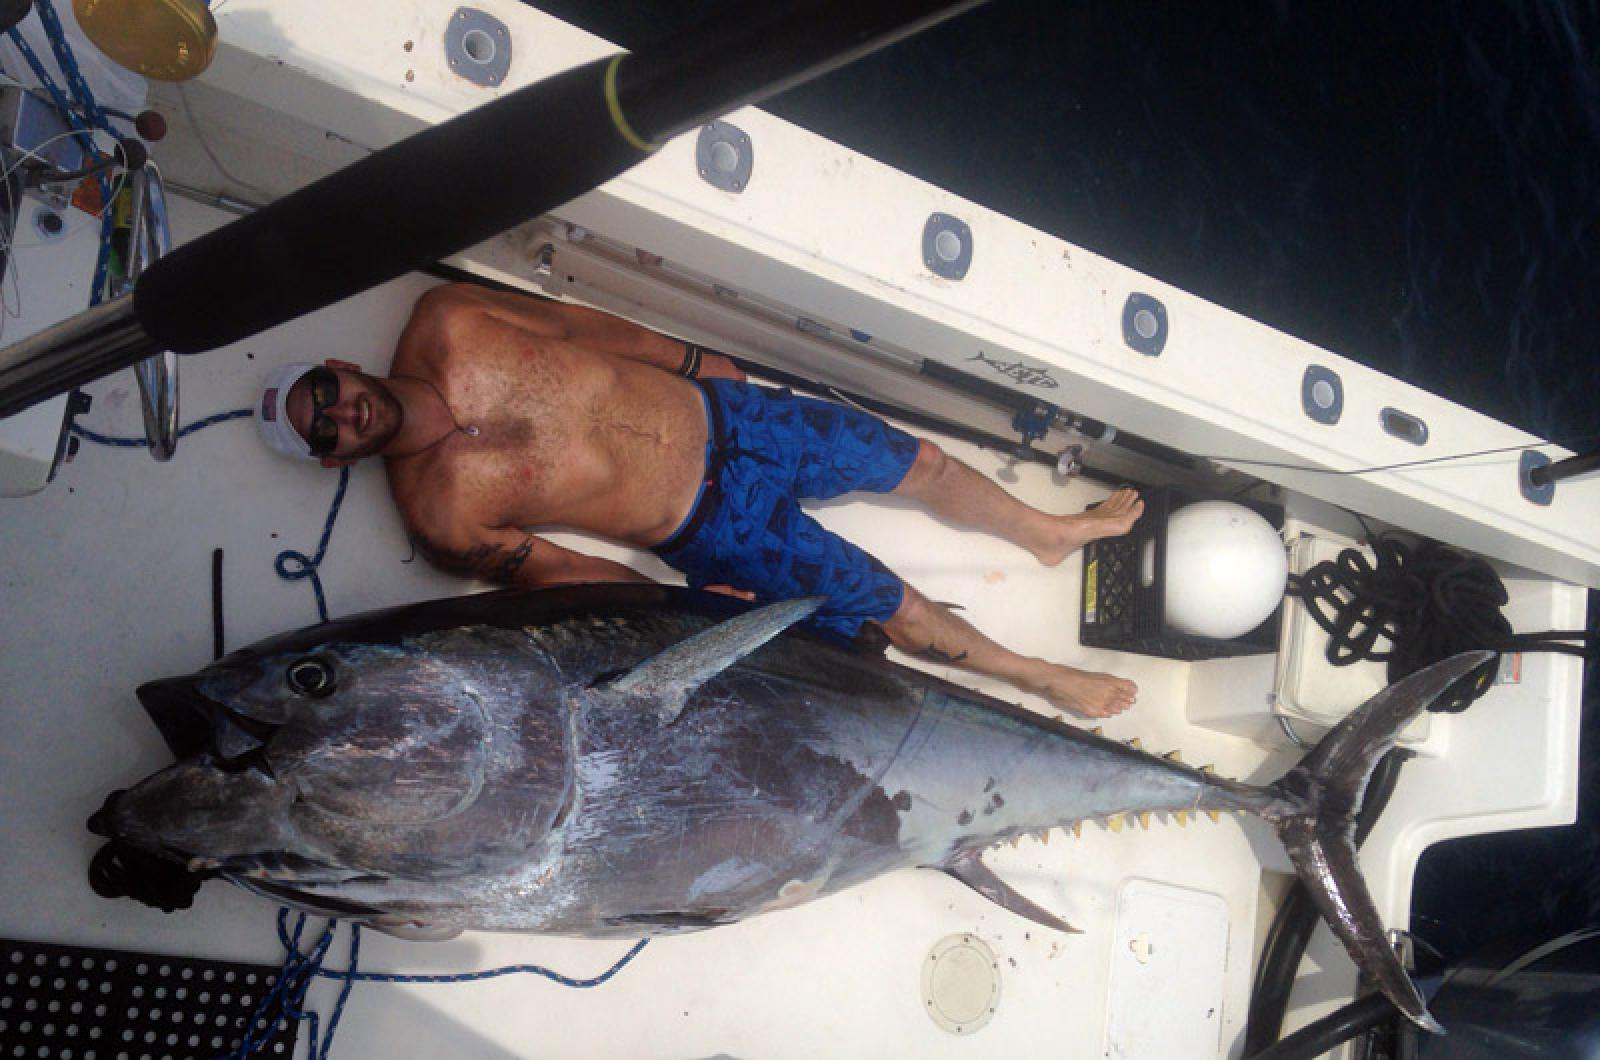 Wicked Tuna” is Back and We're Looking for New Tuna Fishermen to